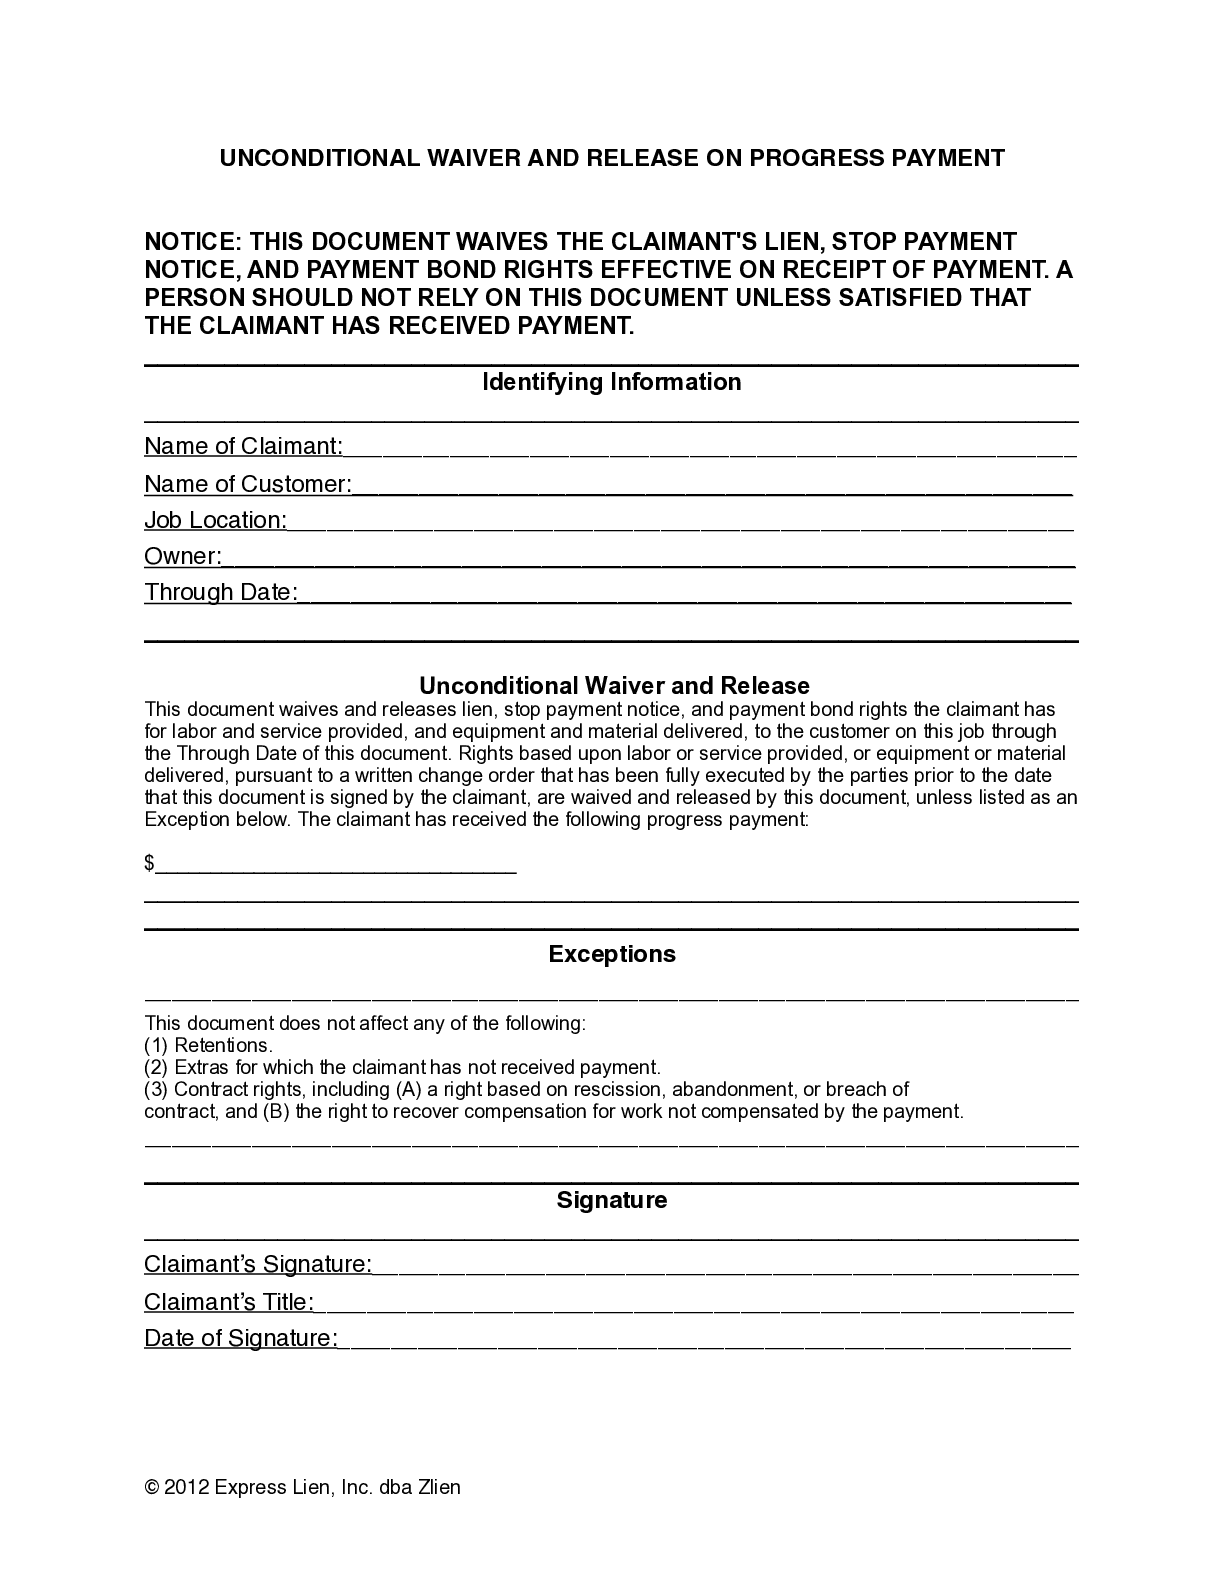 Pennsylvania Partial Unconditional Lien Waiver Form - free from